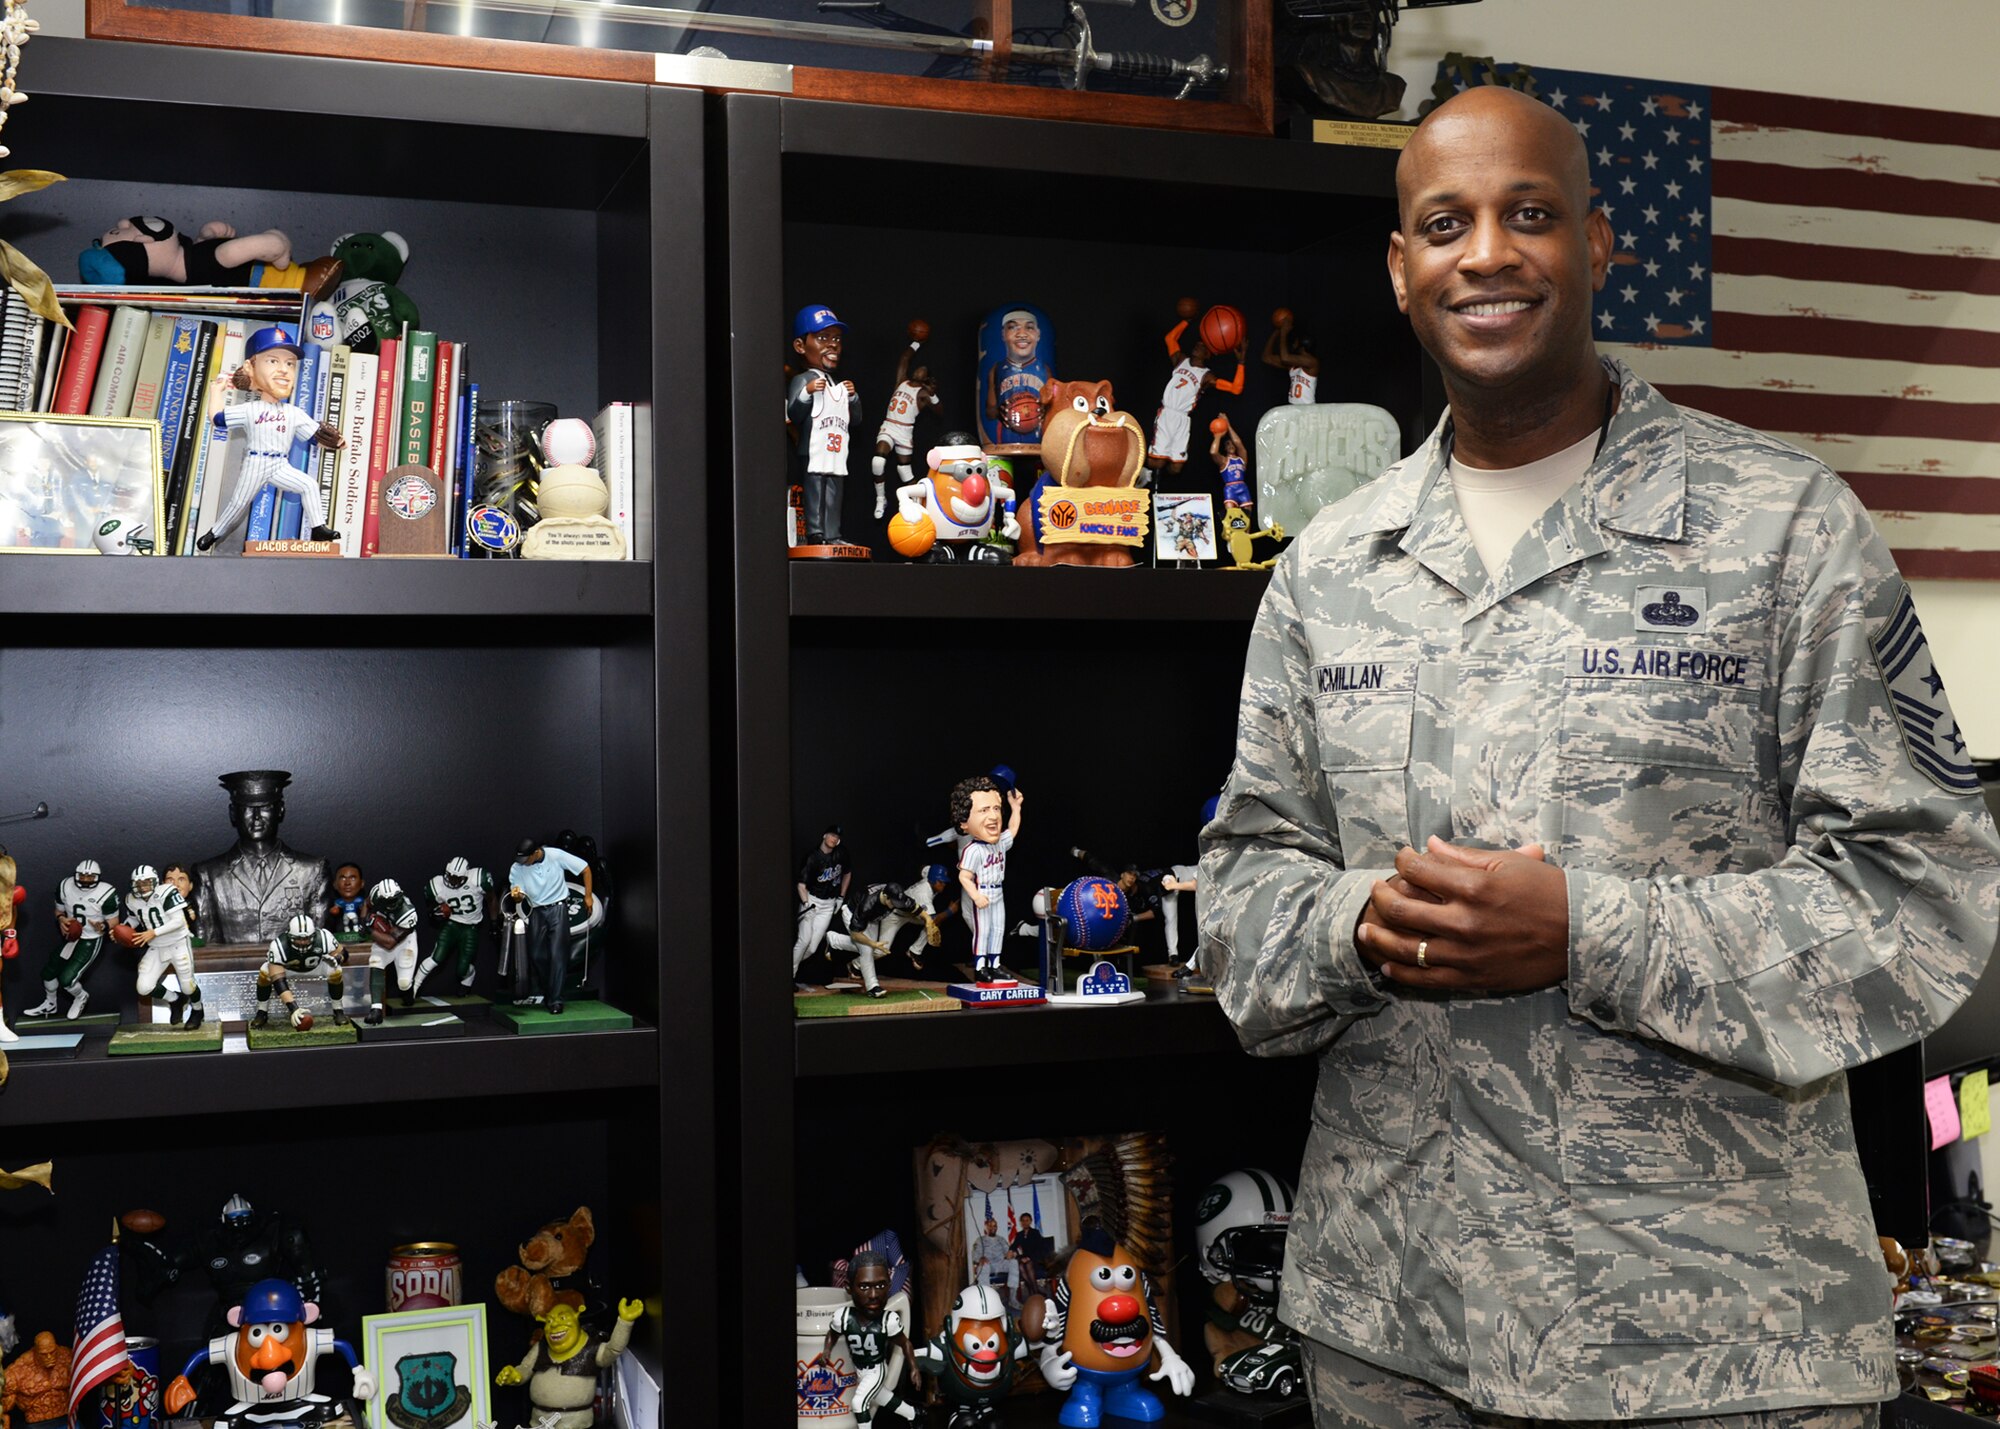 Chief Master Sgt. Michael McMillan, 36th Wing command chief, poses for a photo in front of his sports memorabilia collection Feb. 20, 2016, at Andersen Air Force Base, Guam. As command chief, McMillan’s responsibilities are to support the health and welfare of the Airmen of the 36th Wing and to ensure they have everything they need to complete the mission. (U.S. Air Force photo by Senior Airman Cierra Presentado)